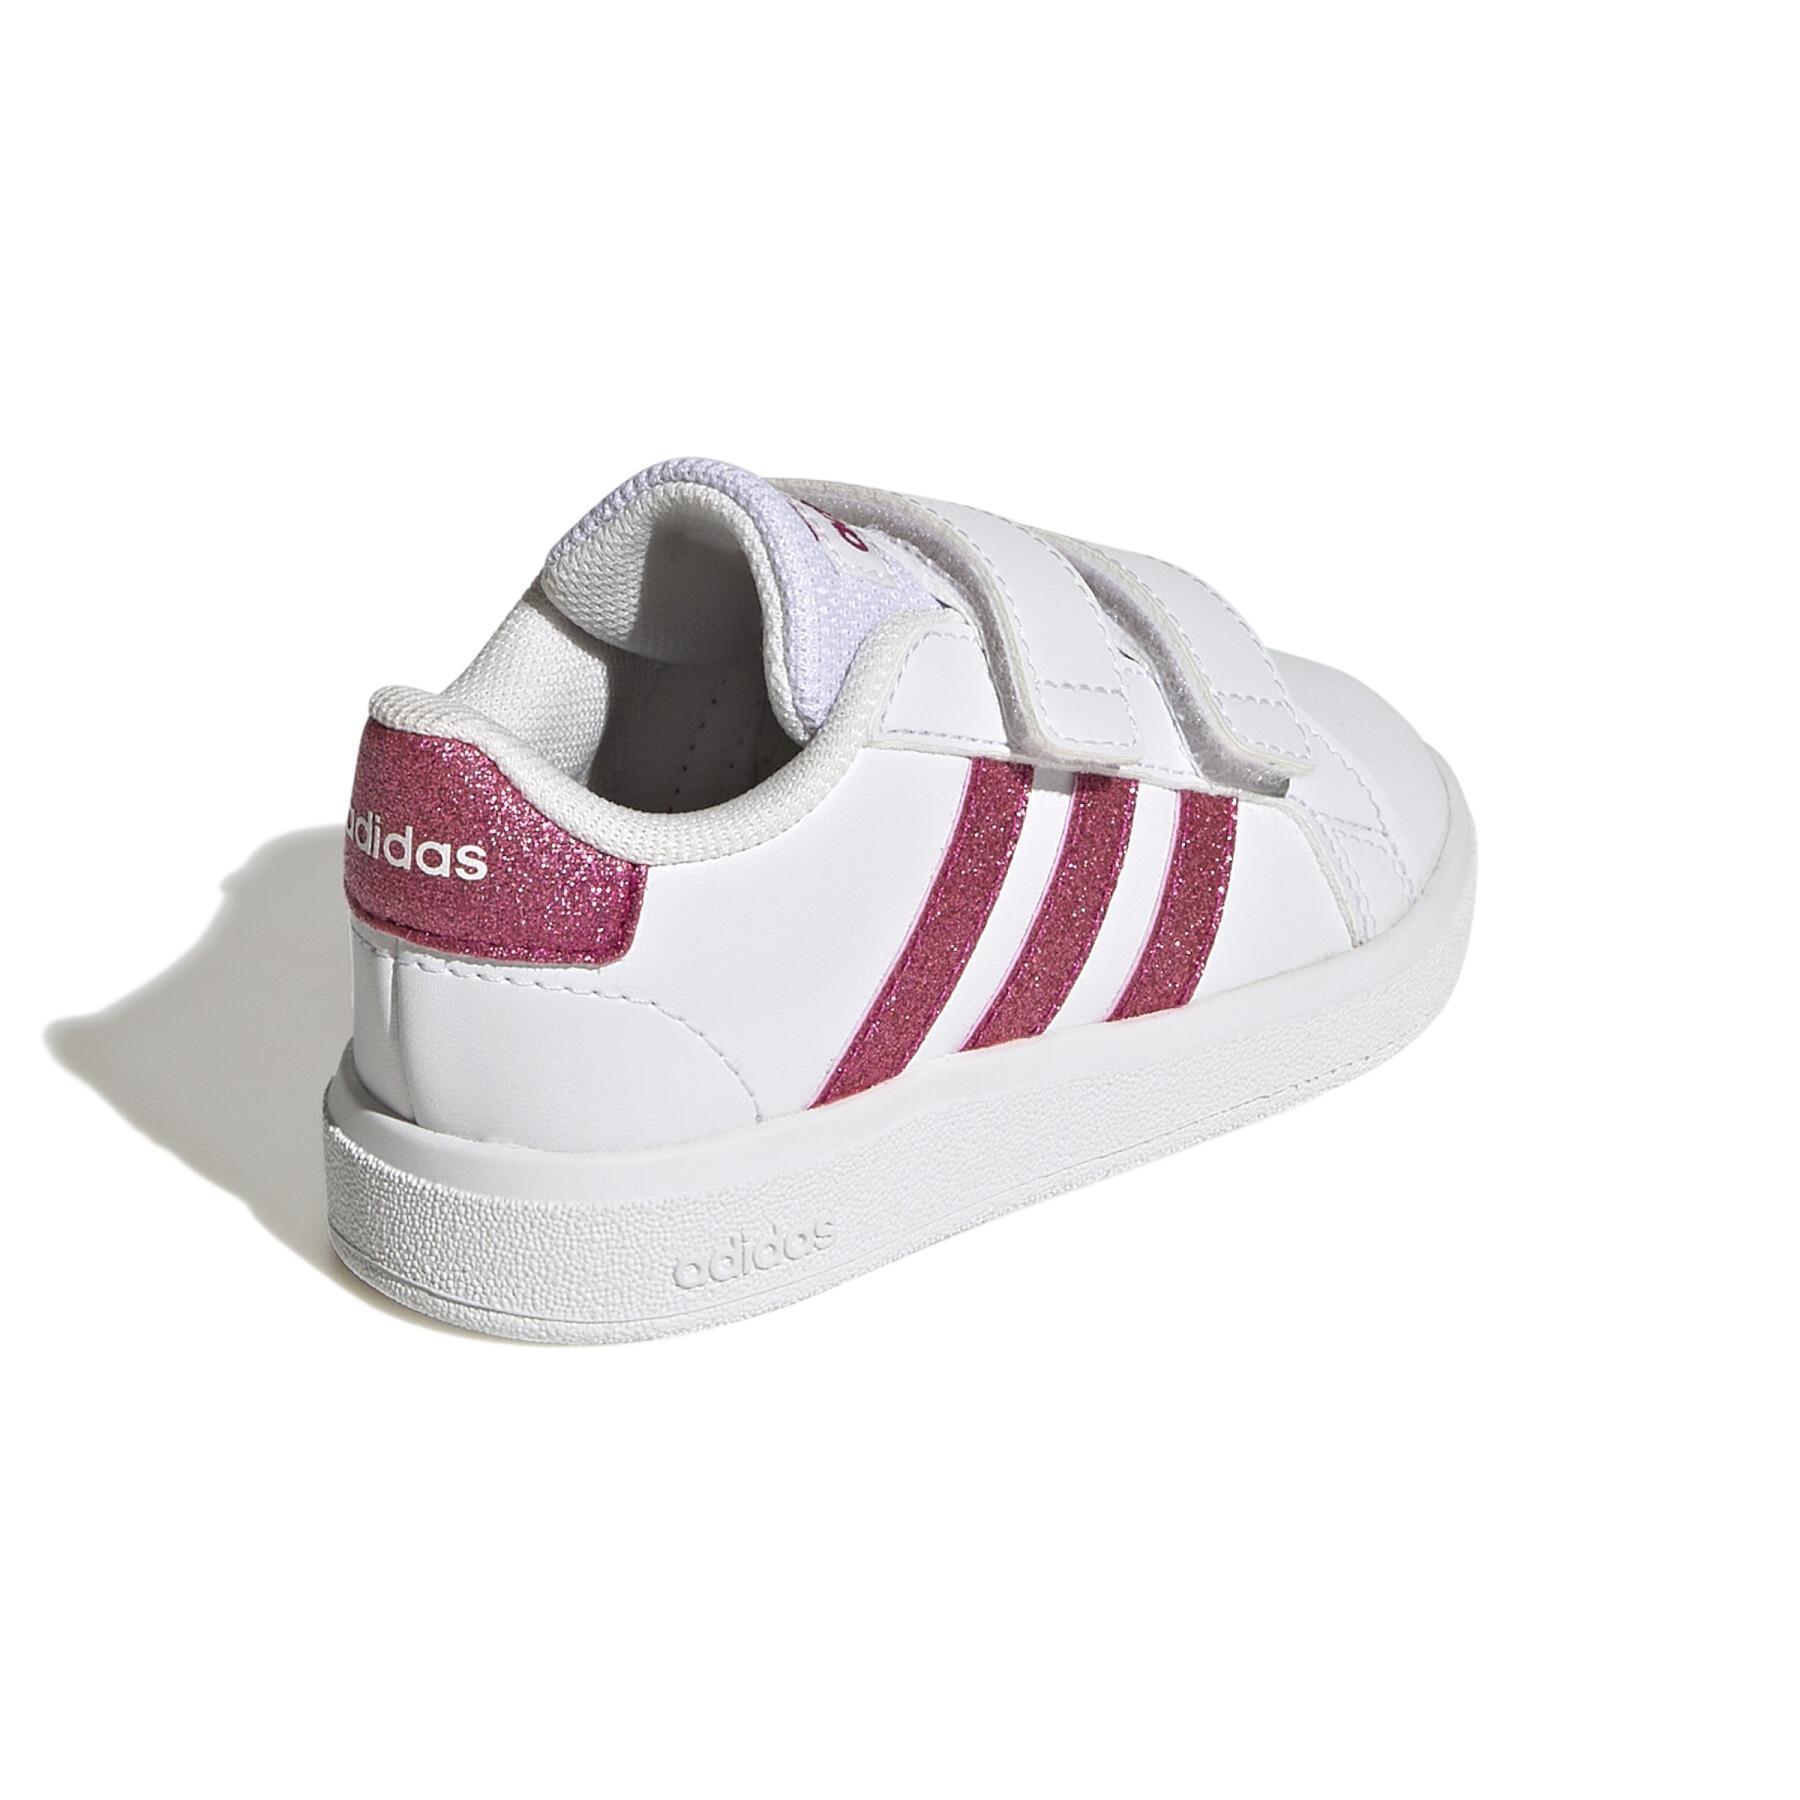 Sneakers Kind adidas Grand Court